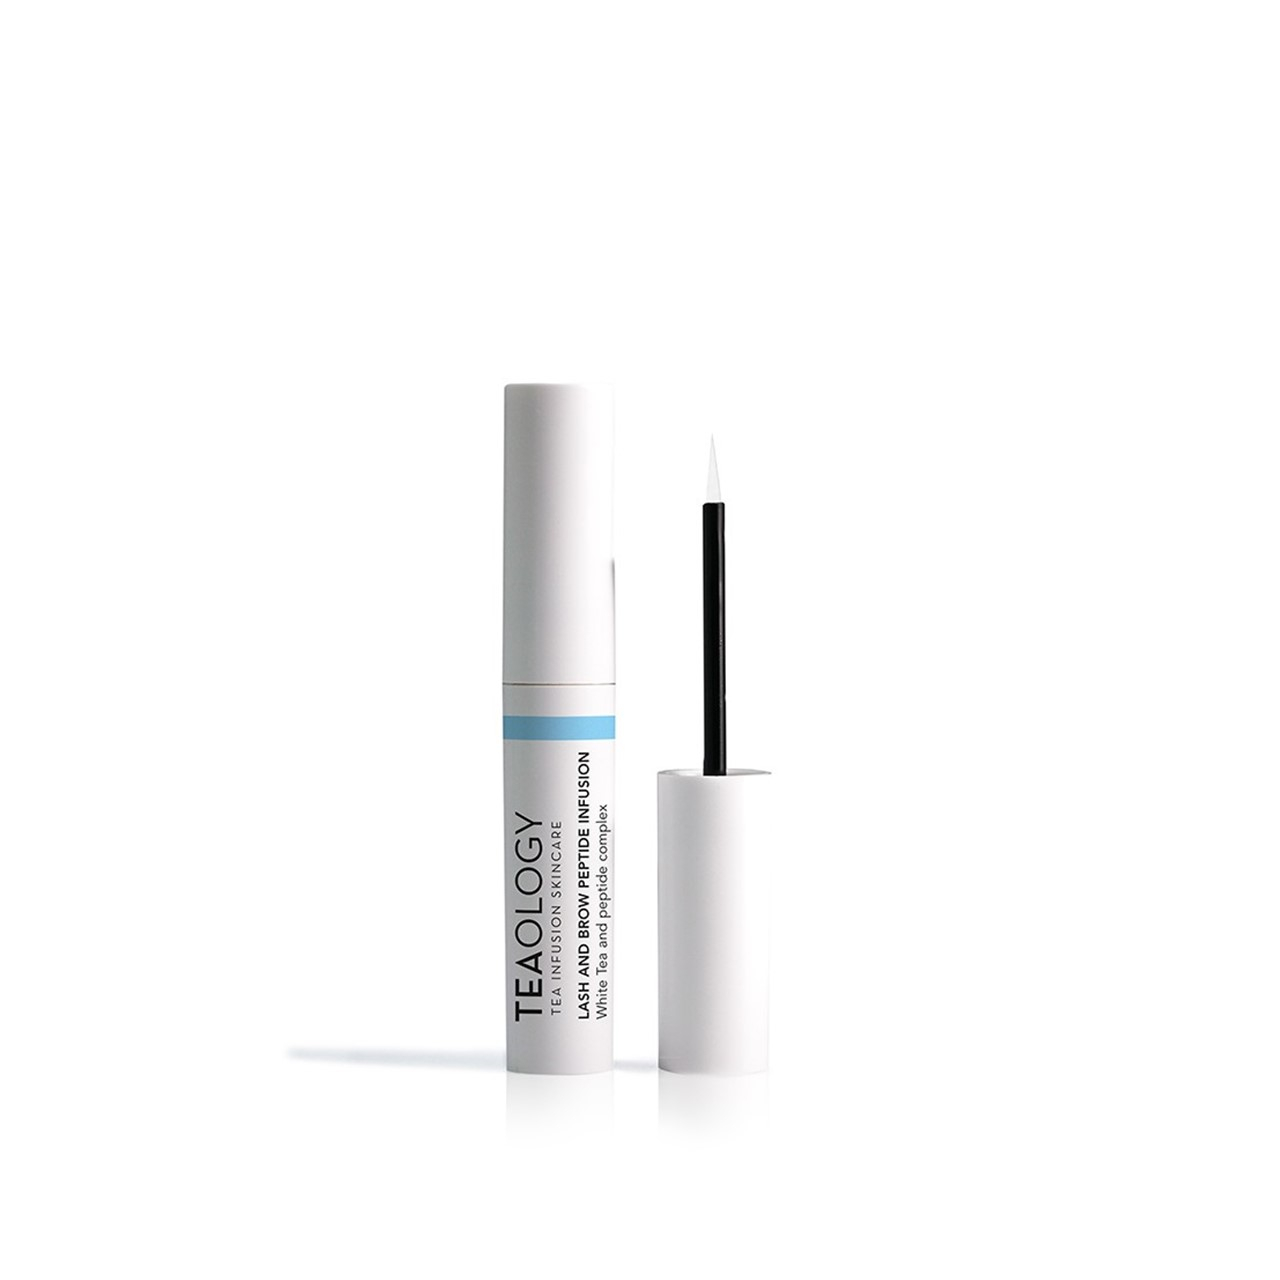 Teaology Lash And Brow Peptide Infusion 5ml (0.17 fl oz)